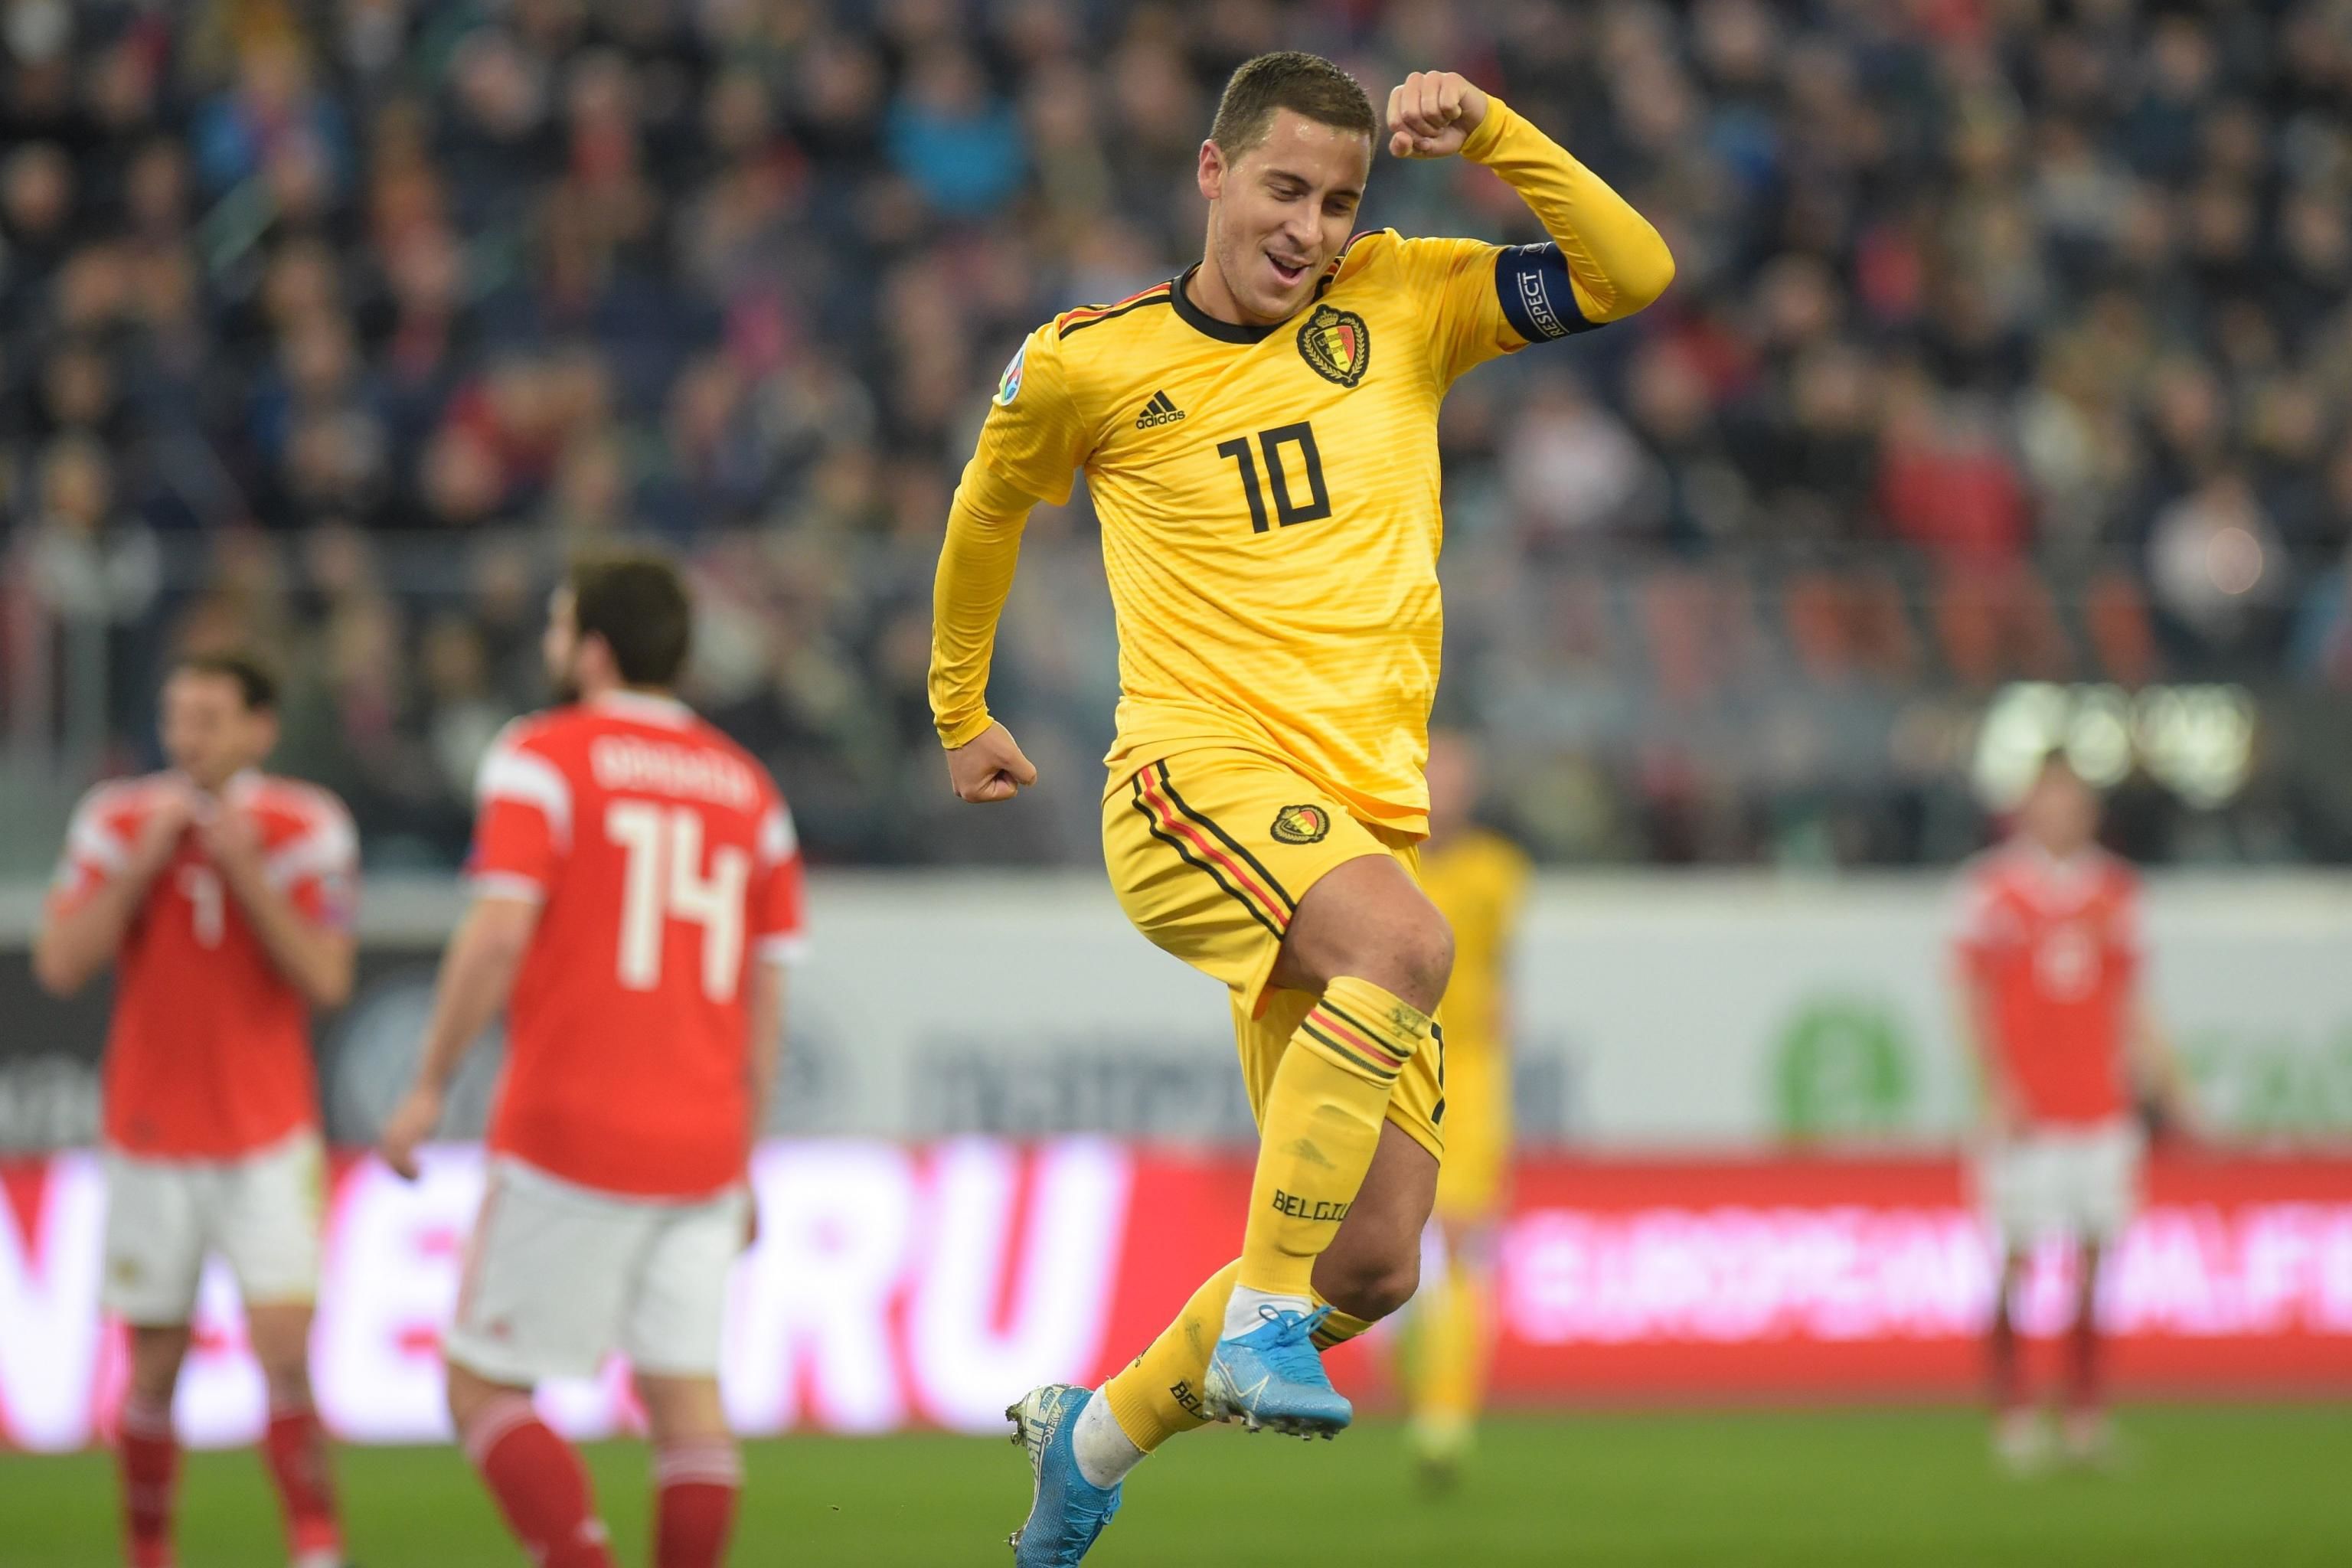 Belgium vs Russia EURO 2020 Match Preview and Live Streaming, Predictions, Odds, and Game Information